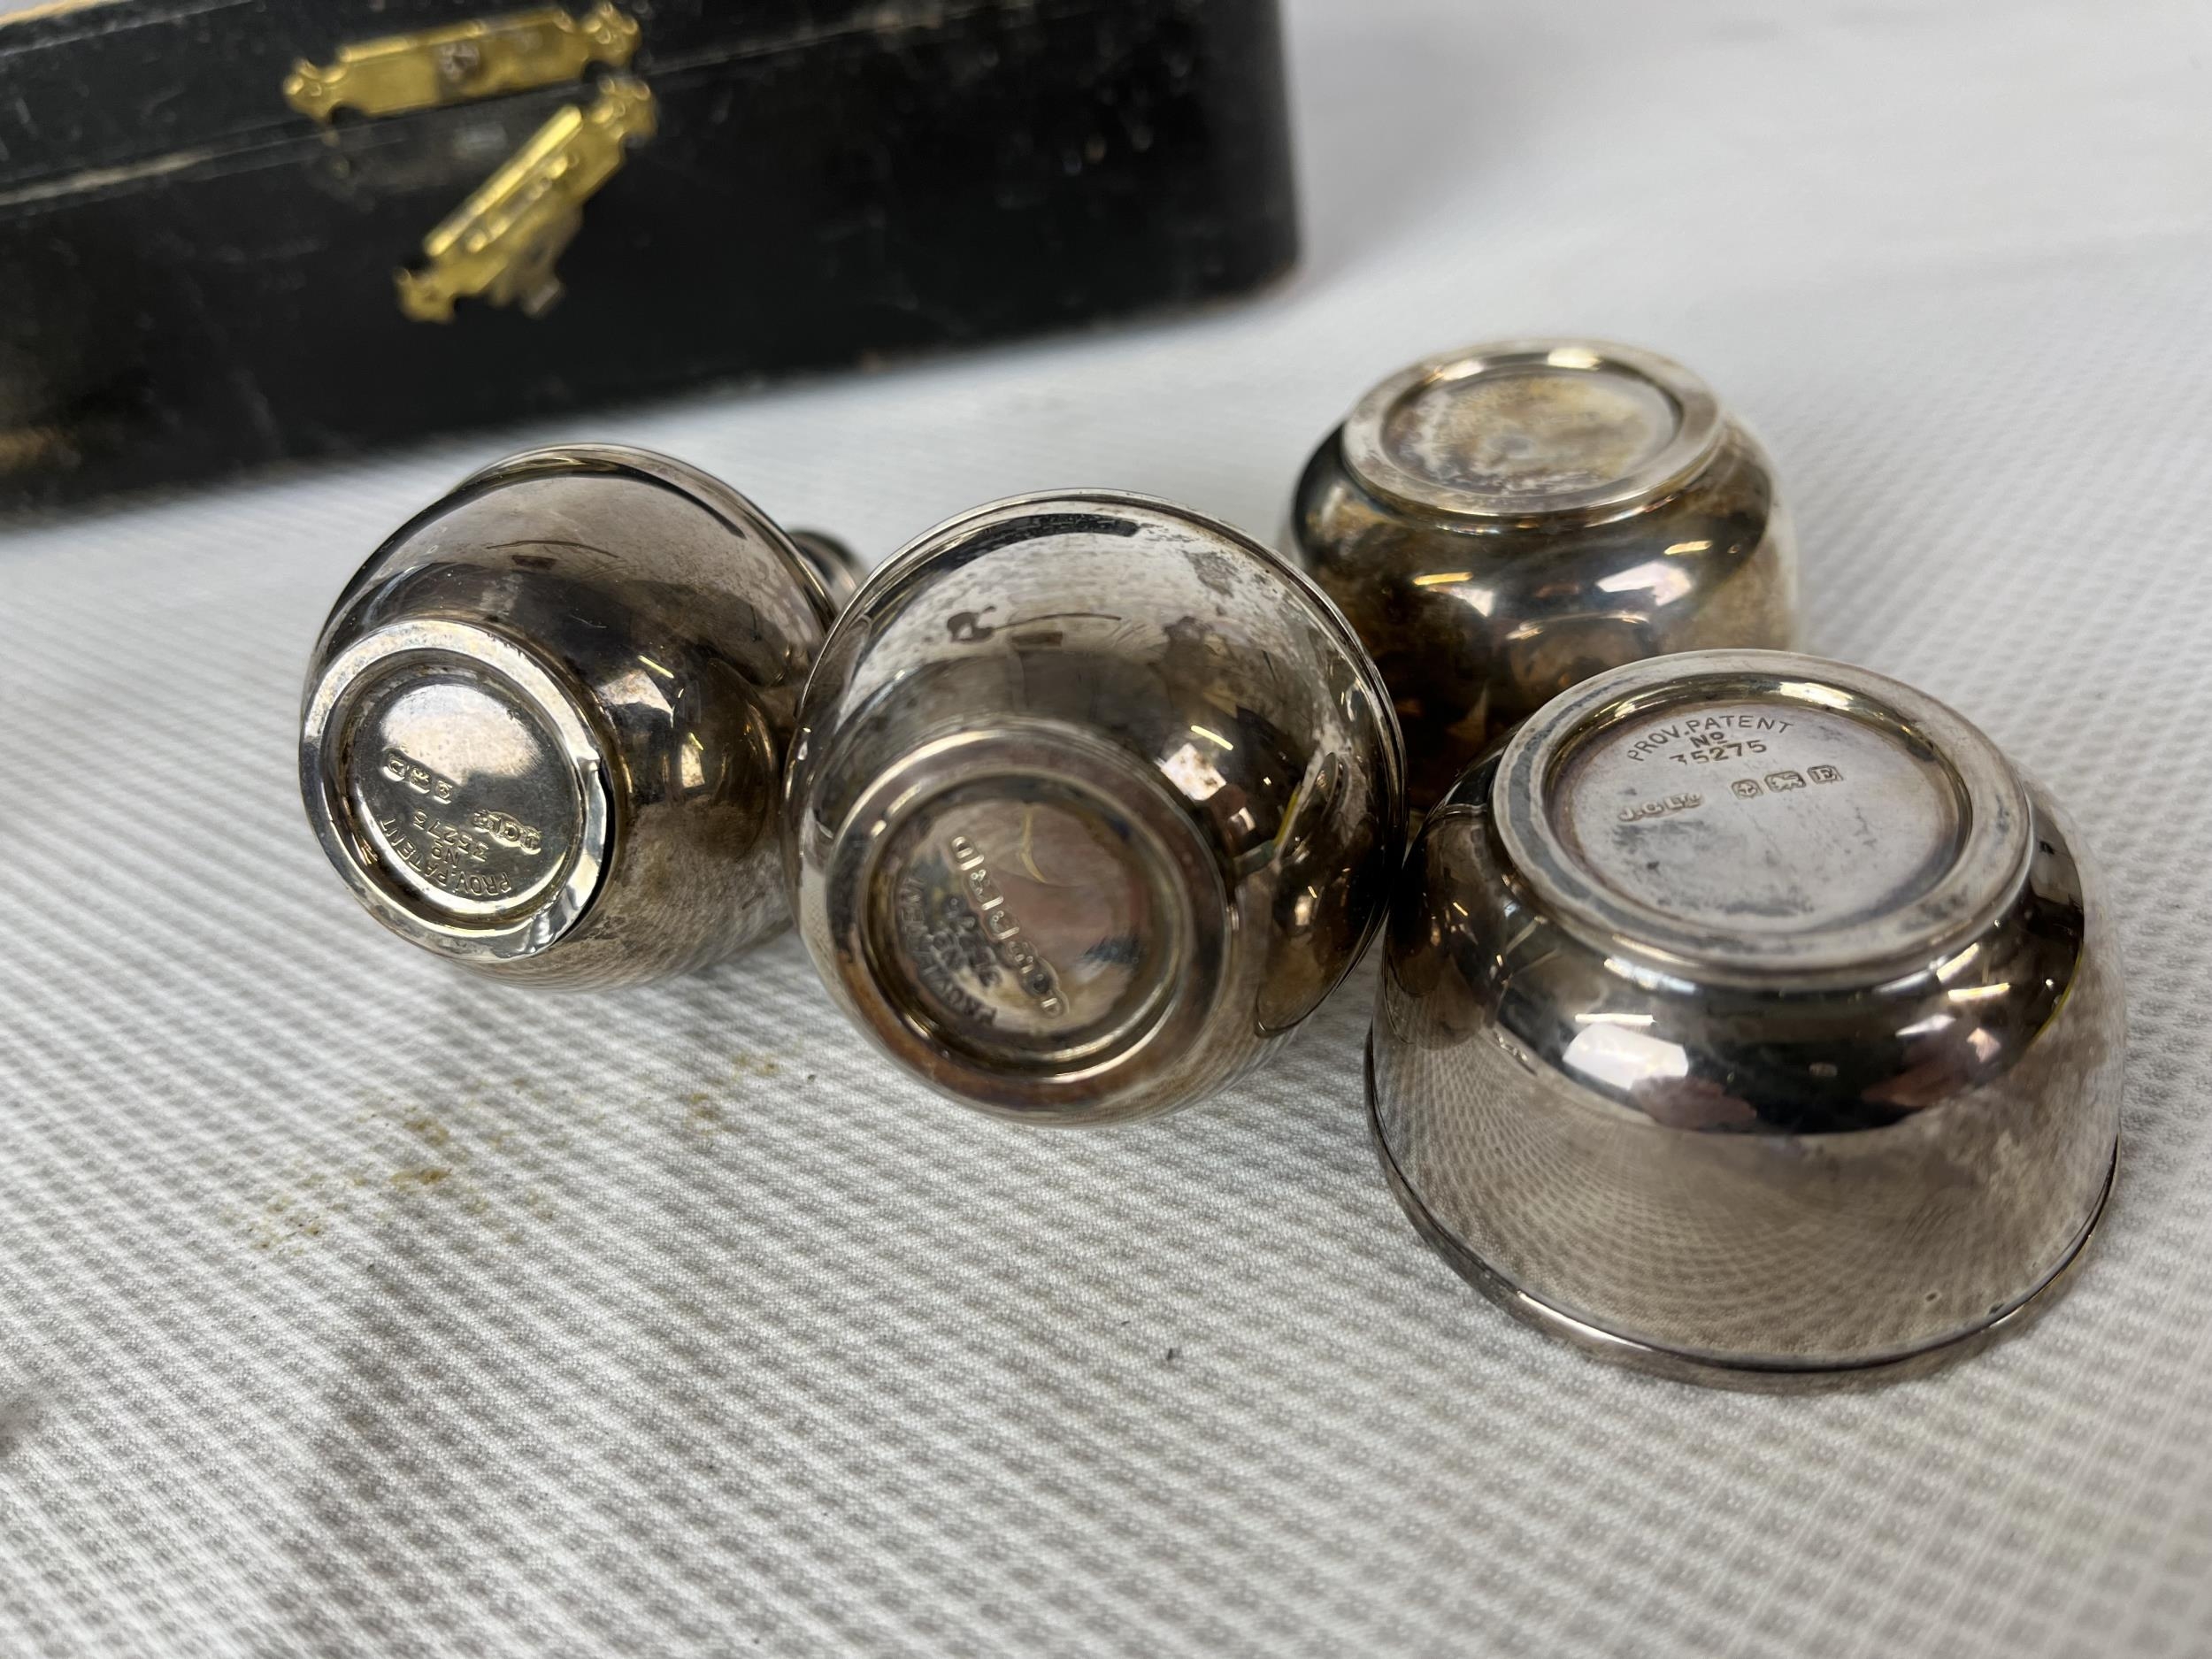 An English hallmarked cruet set, 162g, one piece and fitted box damaged as seen. - Image 4 of 5